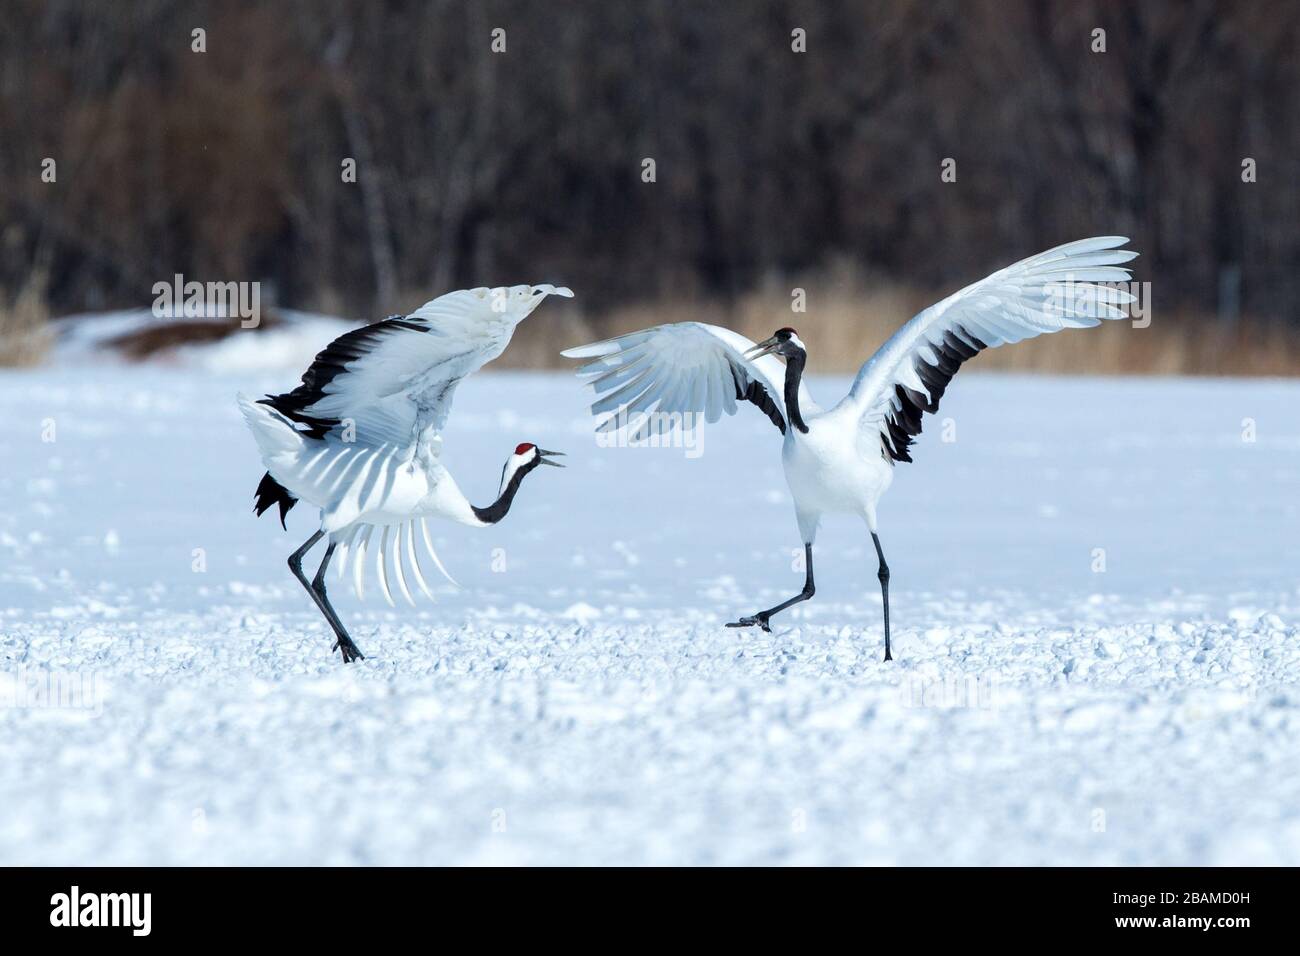 Dancing red crowned cranes (grus japonensis) with open wings on snowy meadow, mating dance ritual, winter, Hokkaido, Japan, japanese crane, beautiful Stock Photo